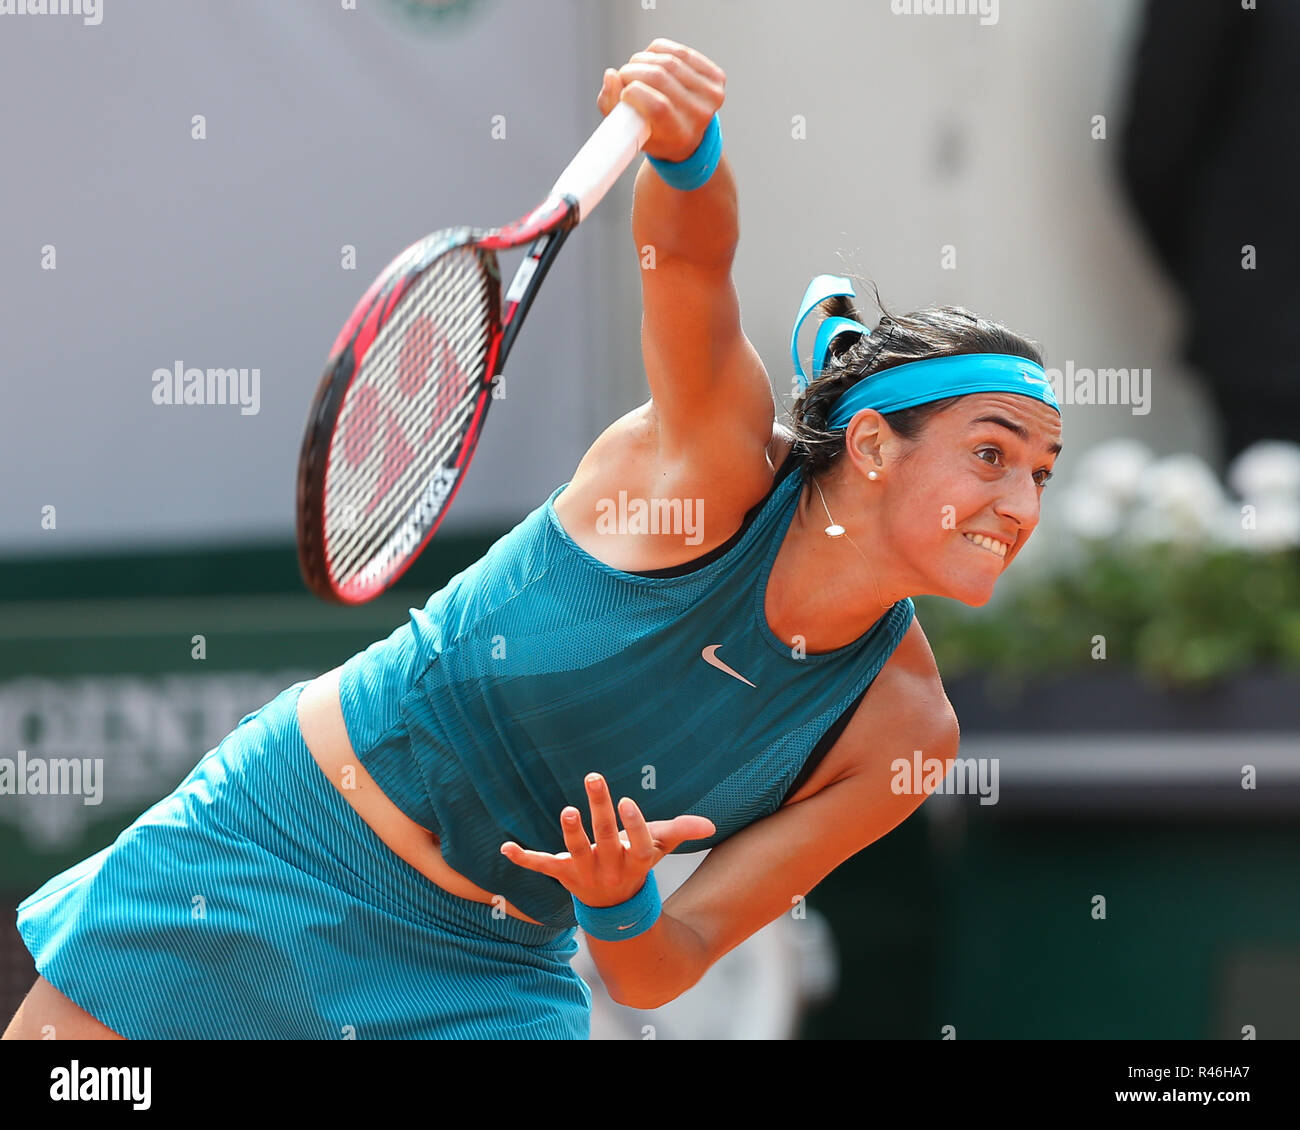 French tennis player Caroline Garcia playing a service shot at the  French Open 2018, Paris, France Stock Photo